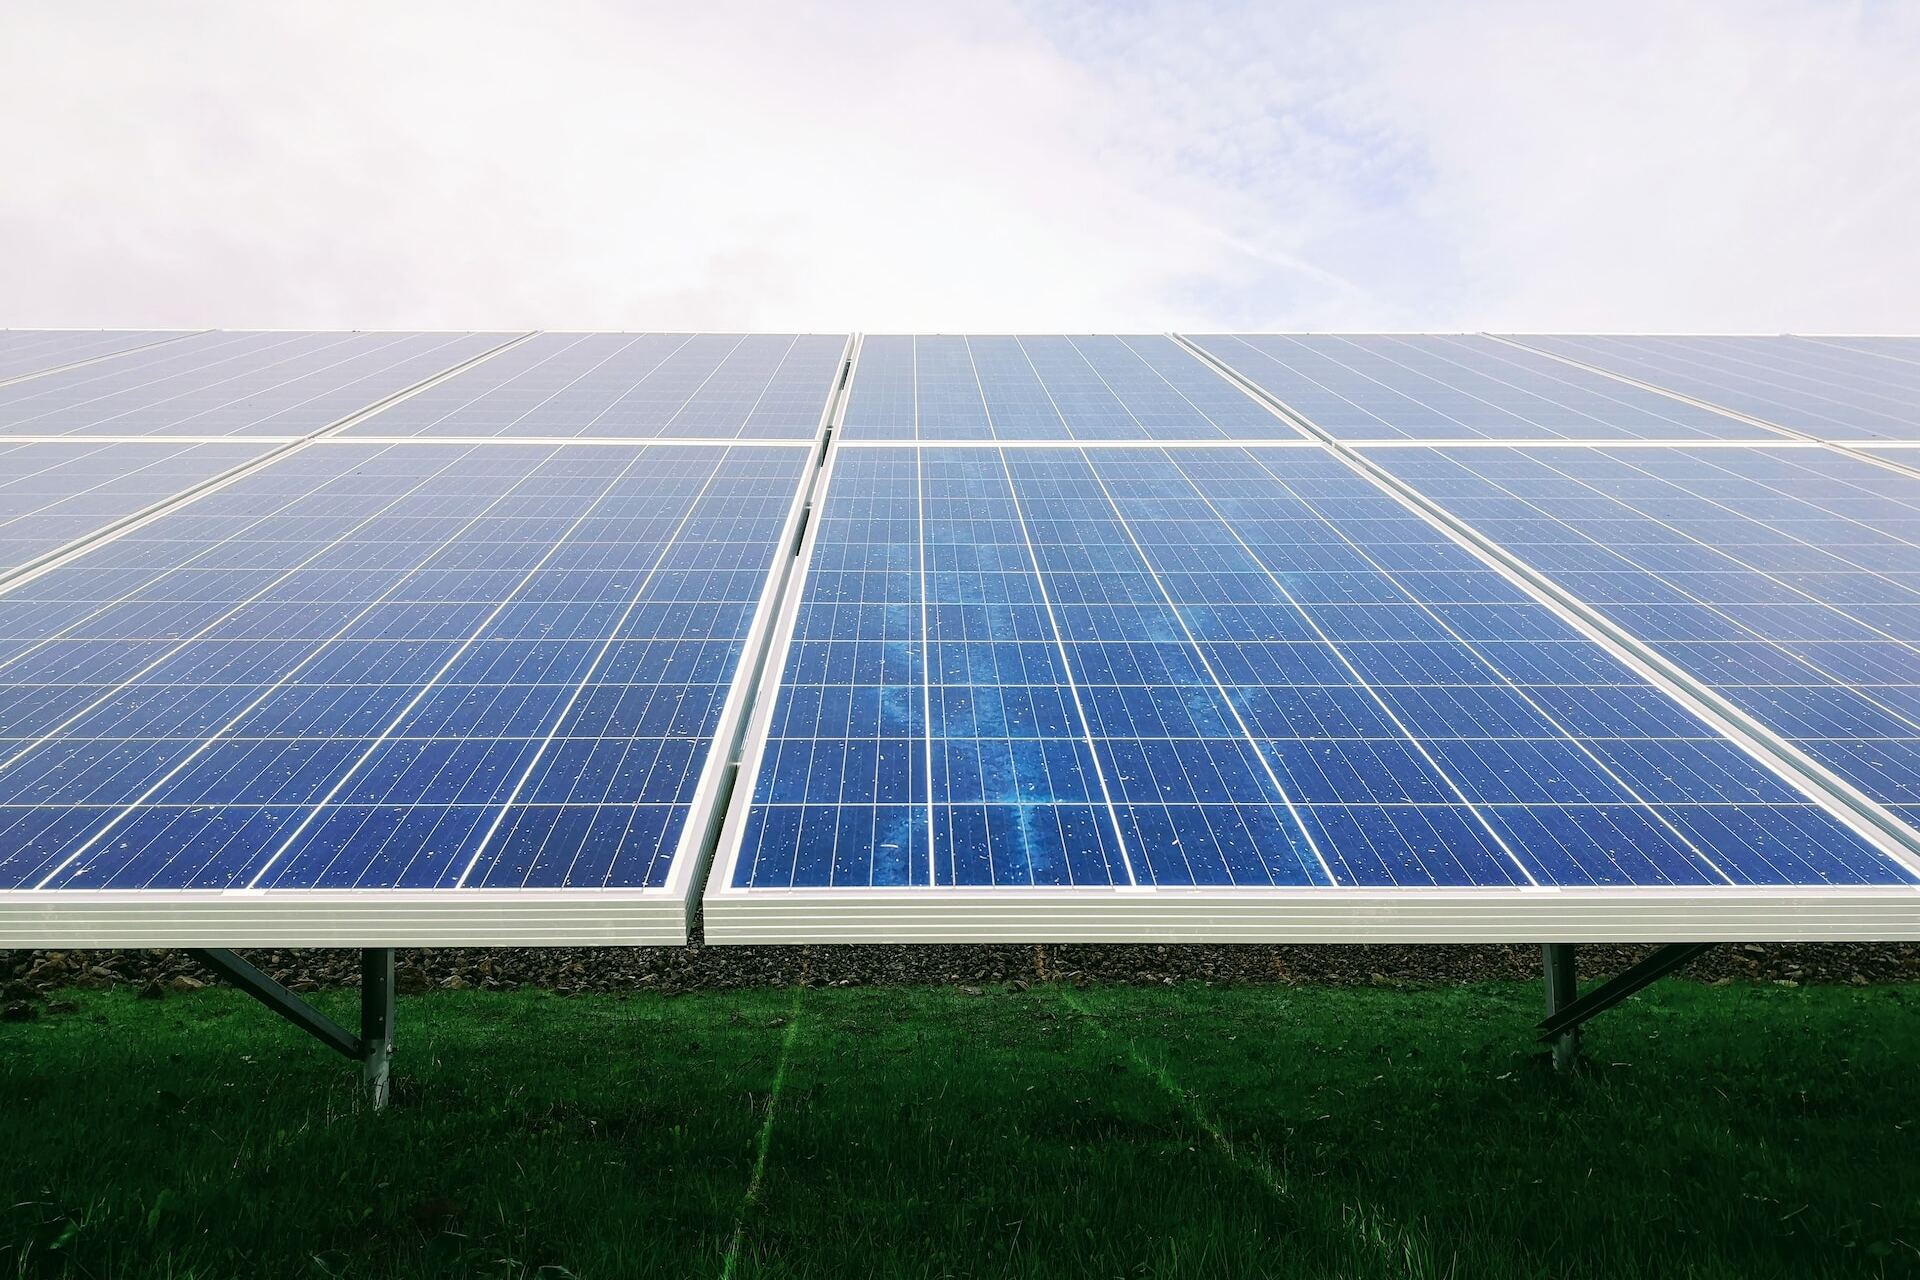 Getting a solar panel cleaning robot can make maintaining solar panels much easier.